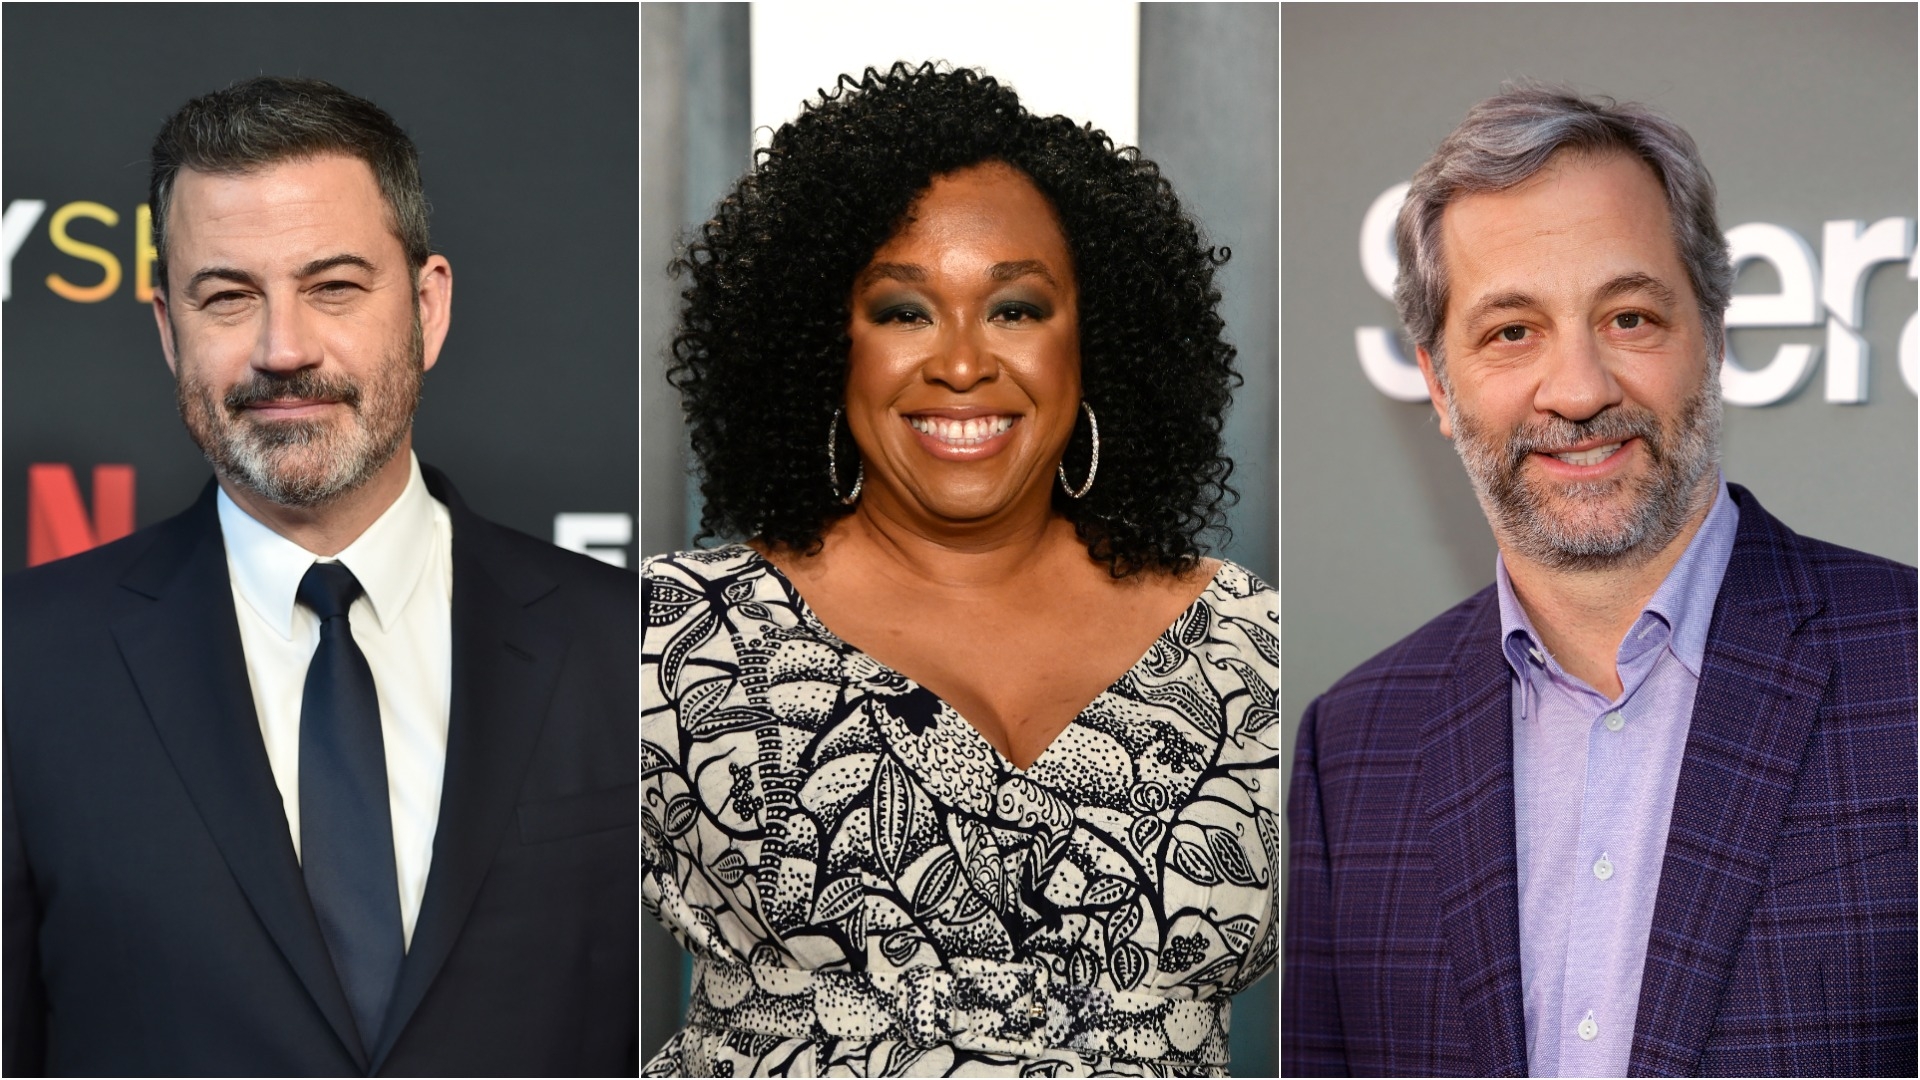 Shonda Rhimes, Jimmy Kimmel, Judd Apatow, and more sign gun safety pledge